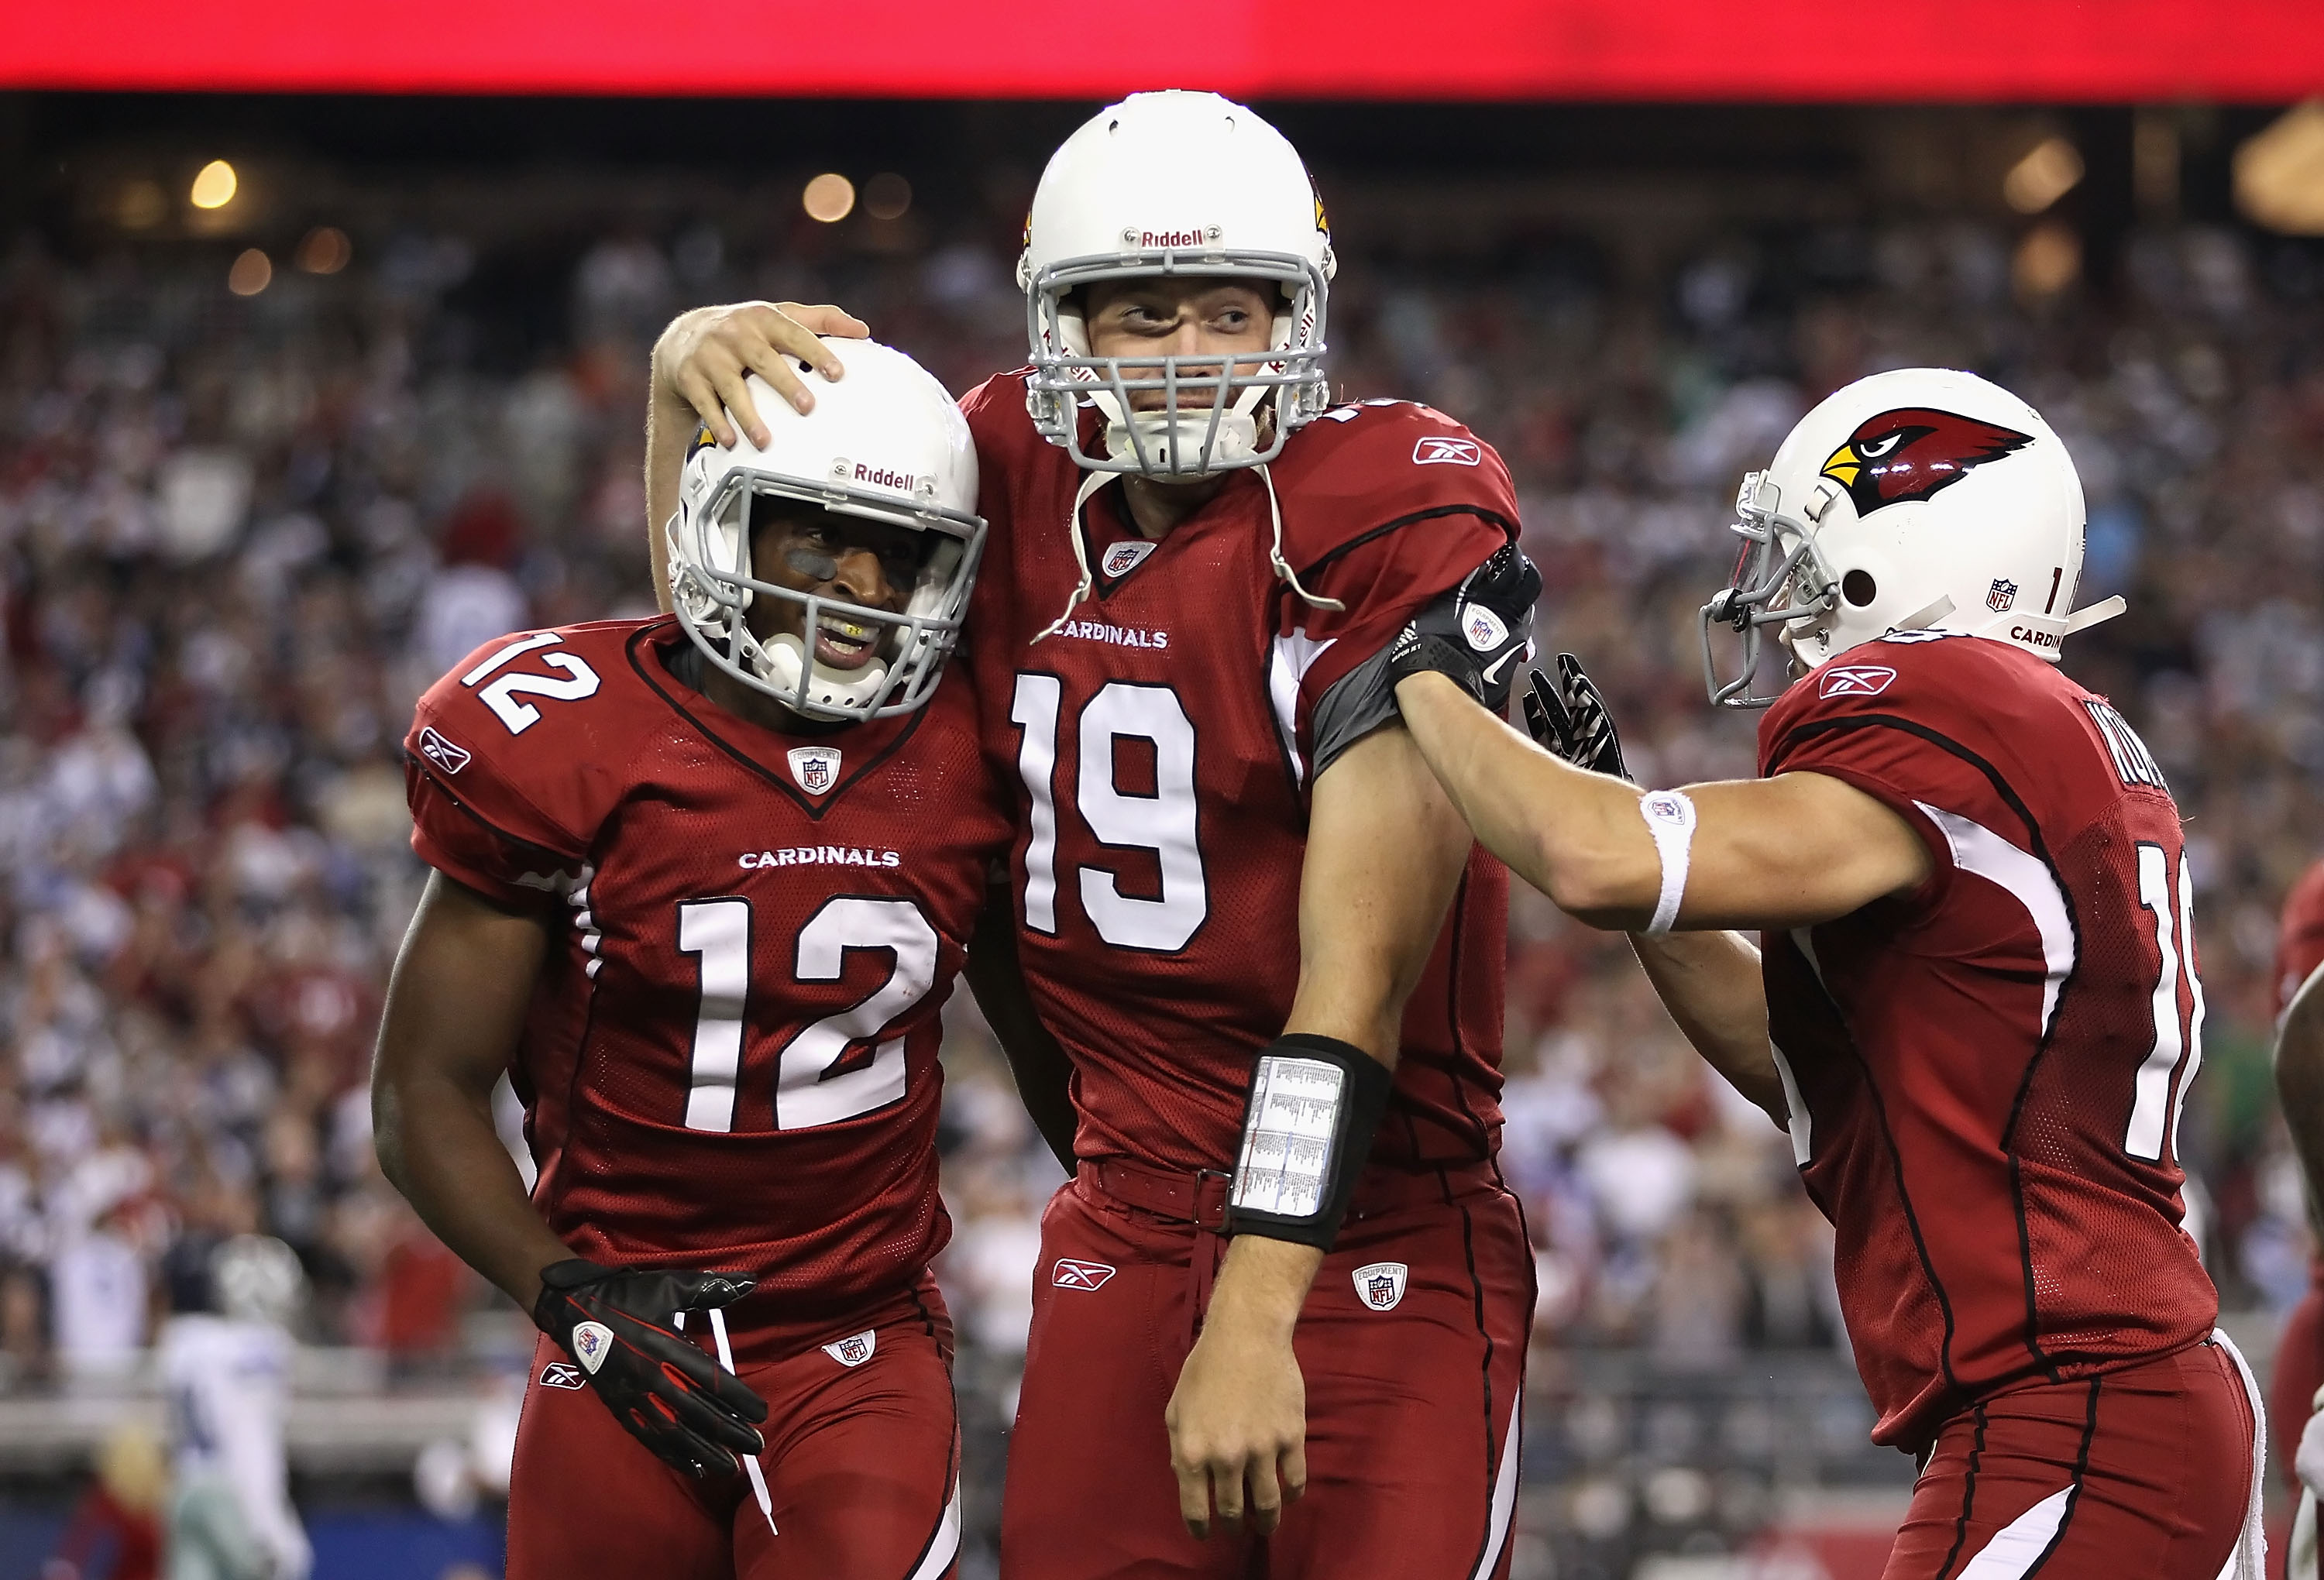 GLENDALE, AZ - DECEMBER 25: Wide receiver Andre Roberts #12 of the Arizona Cardinals celebrates with quarterback John Skelton #19 after scoring on a 74 yard touchdown reception against the Dallas Cowboys during the second quarter of the NFL game at the Un